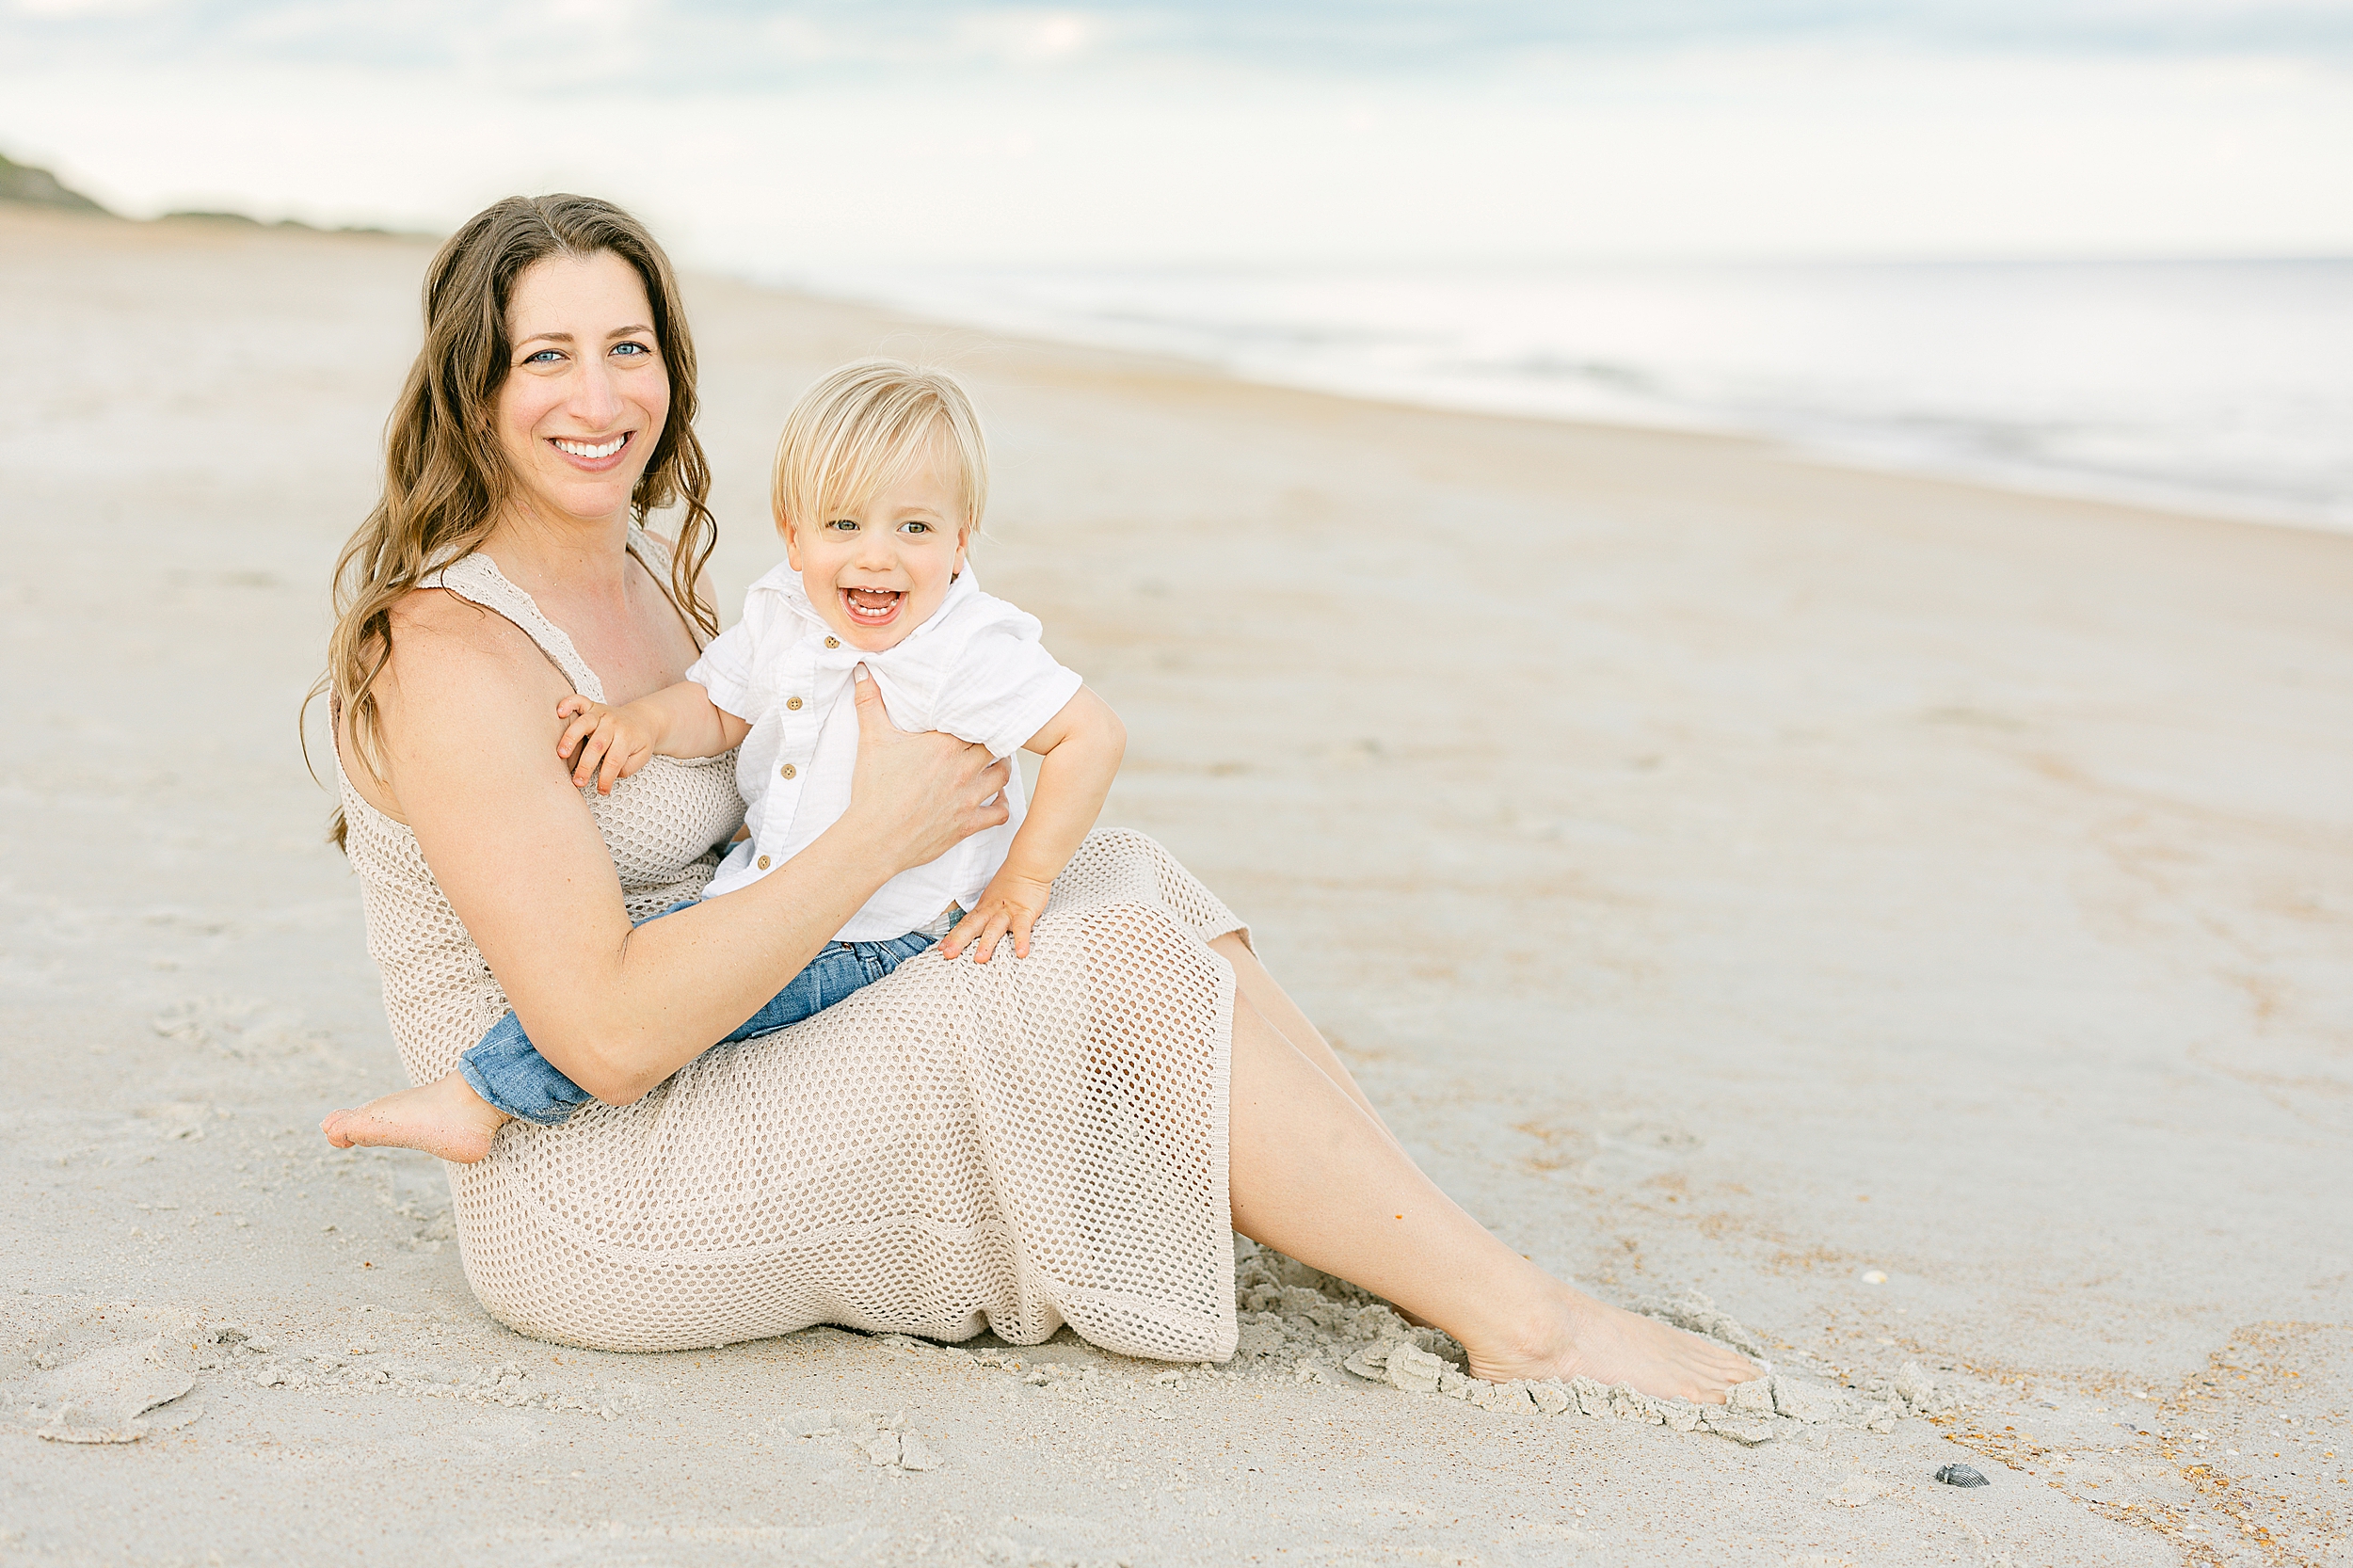 A woman in a tan crochet dress holds a little boy with blond hair on her lap on the beach.